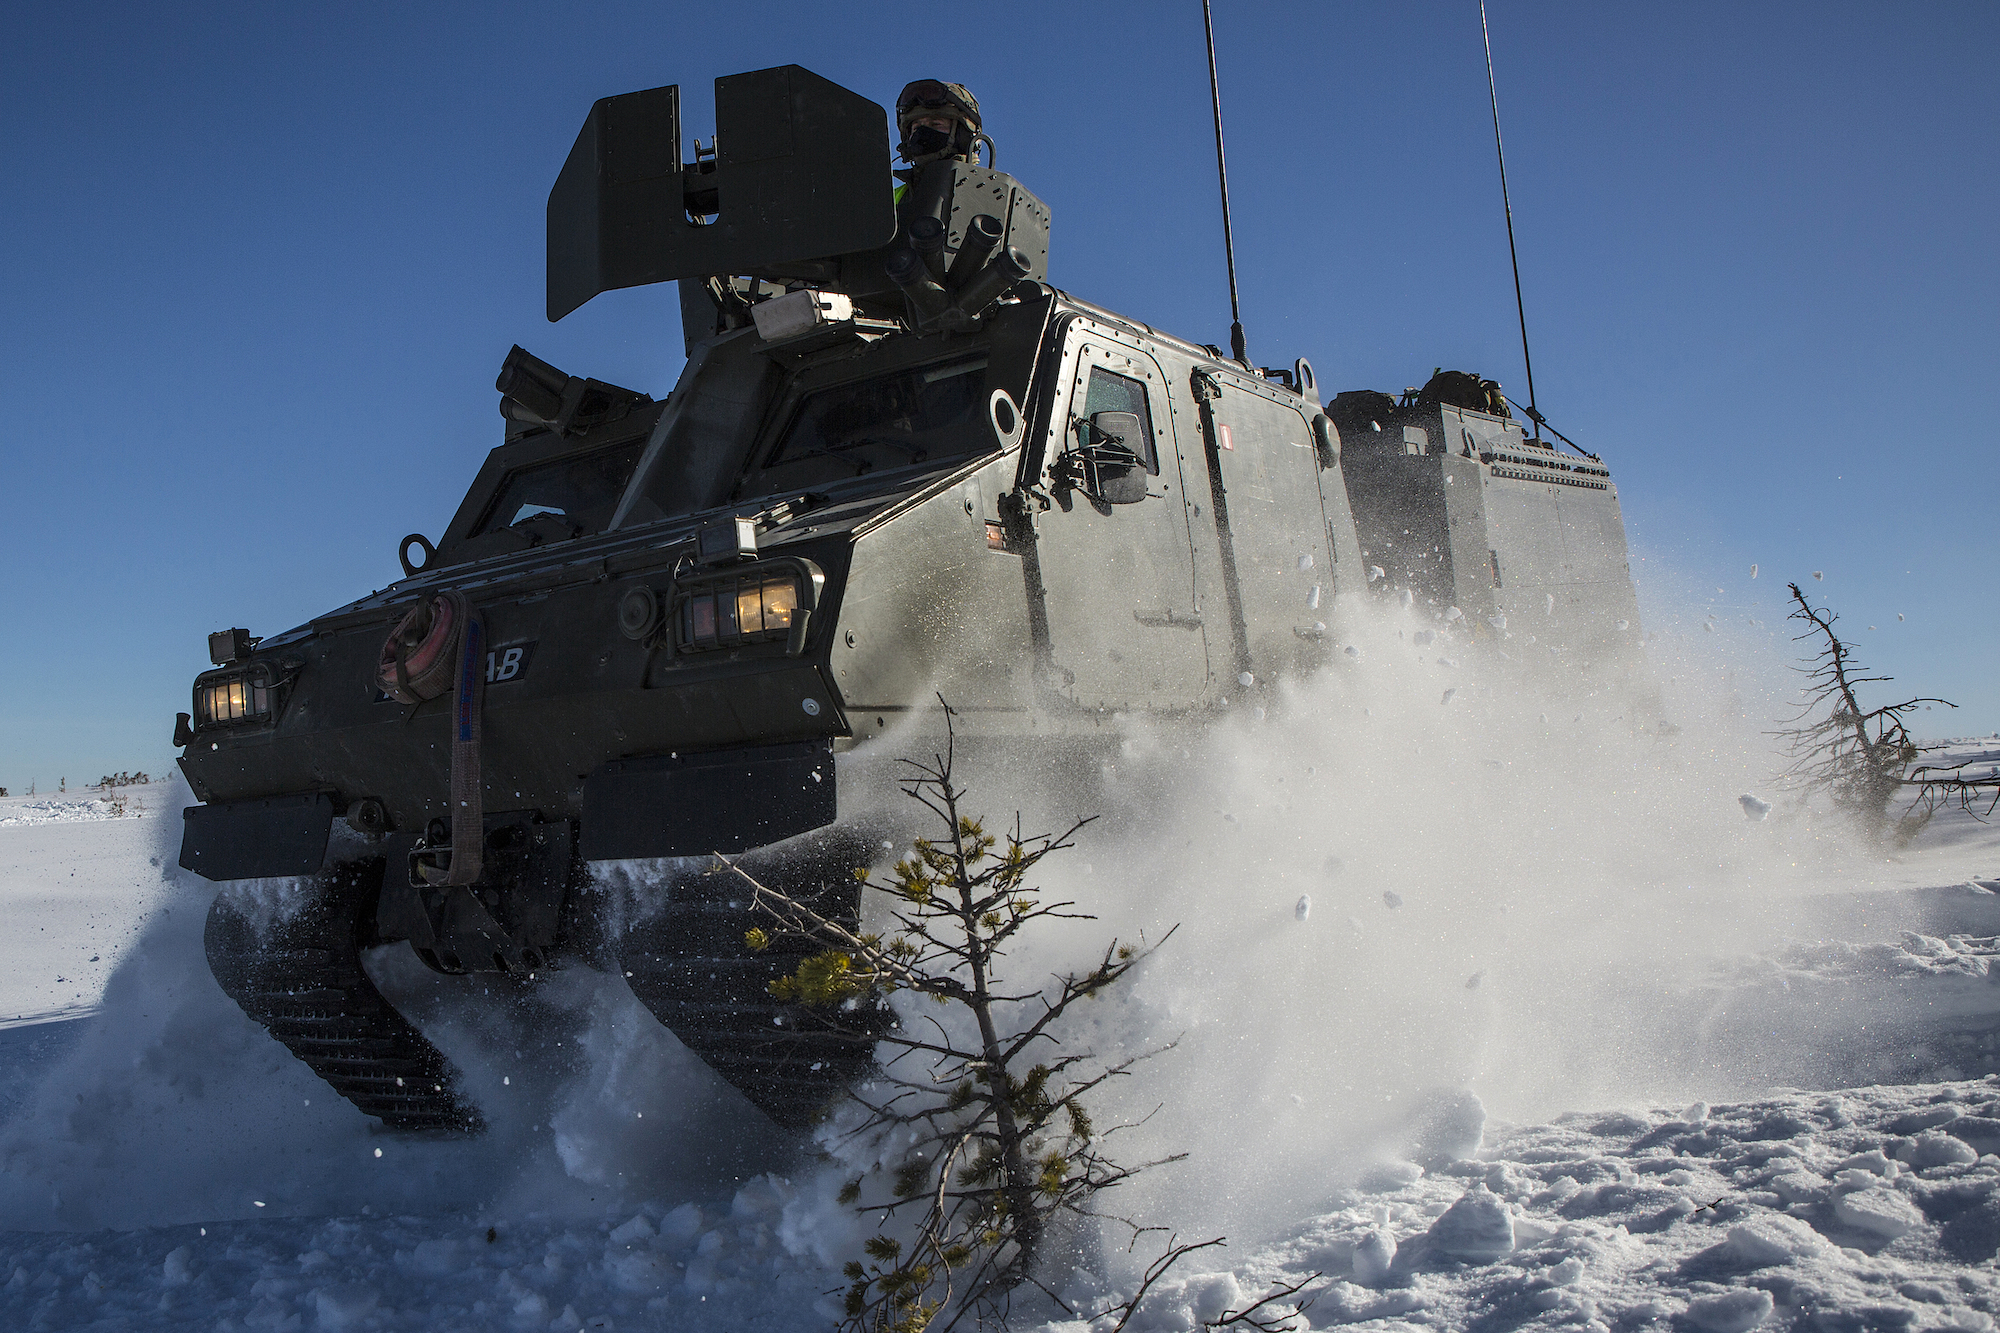 The Army’s new Arctic vehicle, Beowulf, is made for ice and marshes